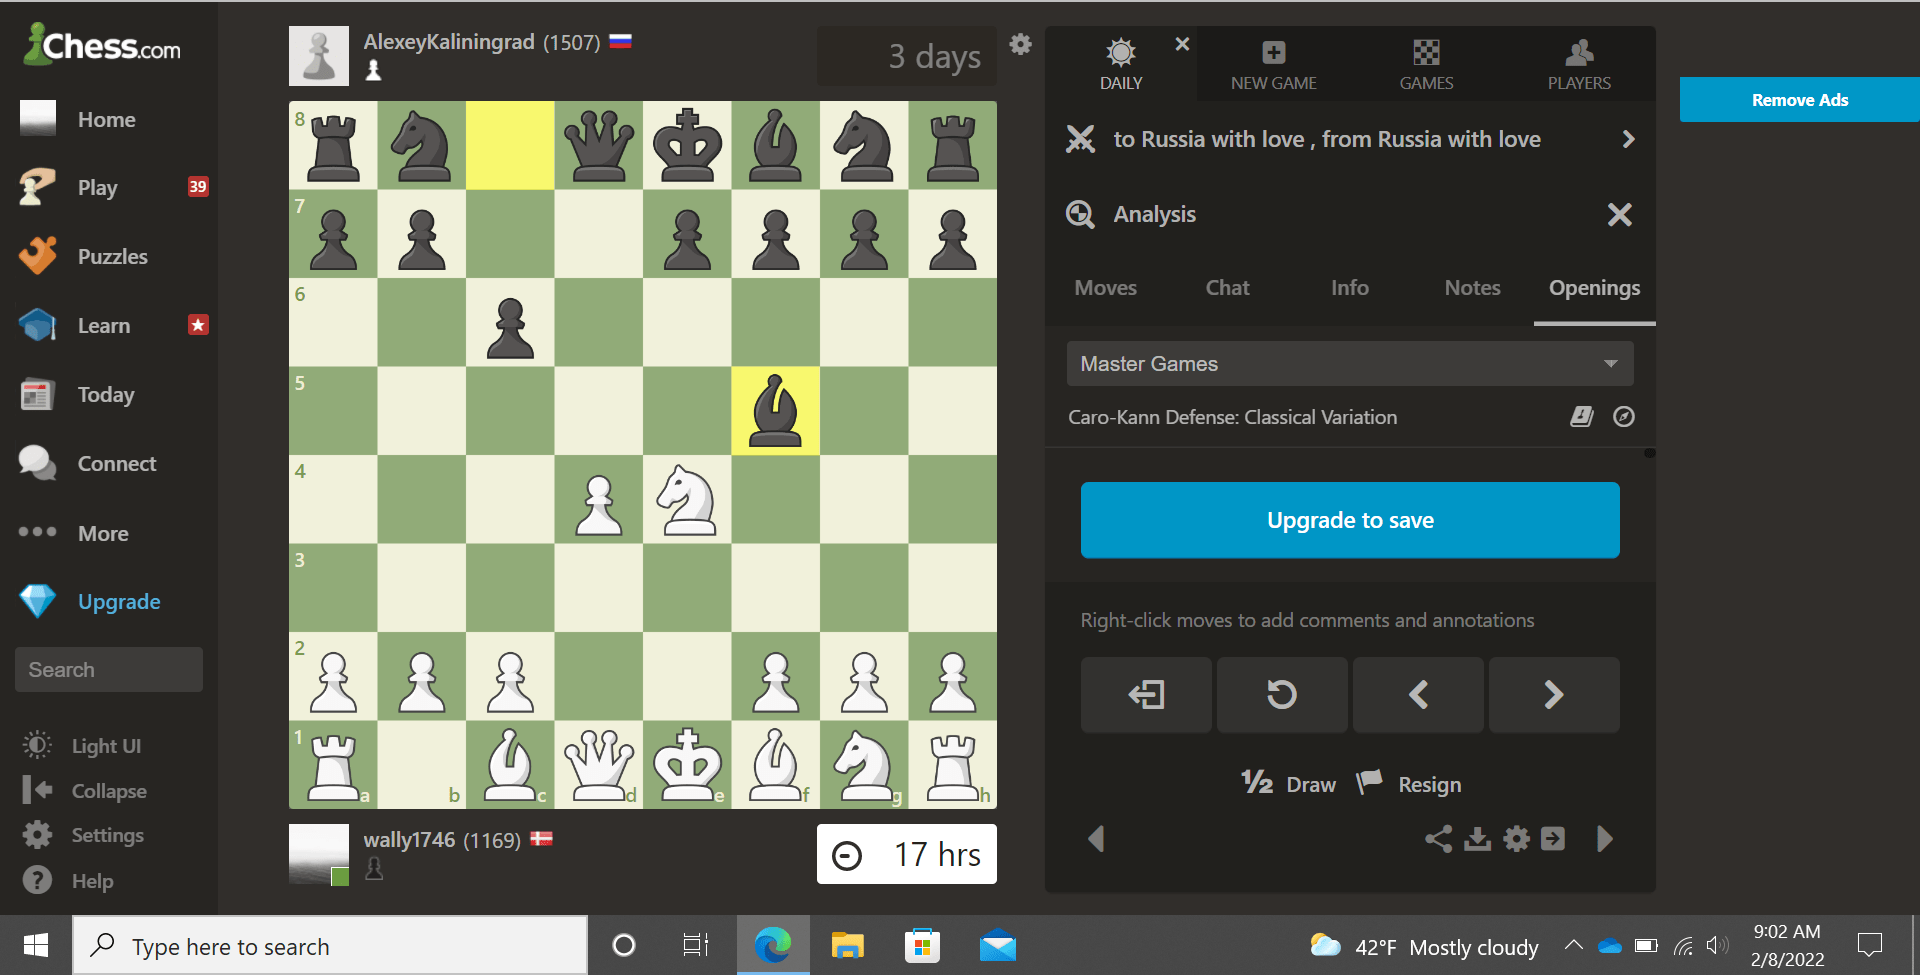 How do I use the Game Explorer? - Chess.com Member Support and FAQs